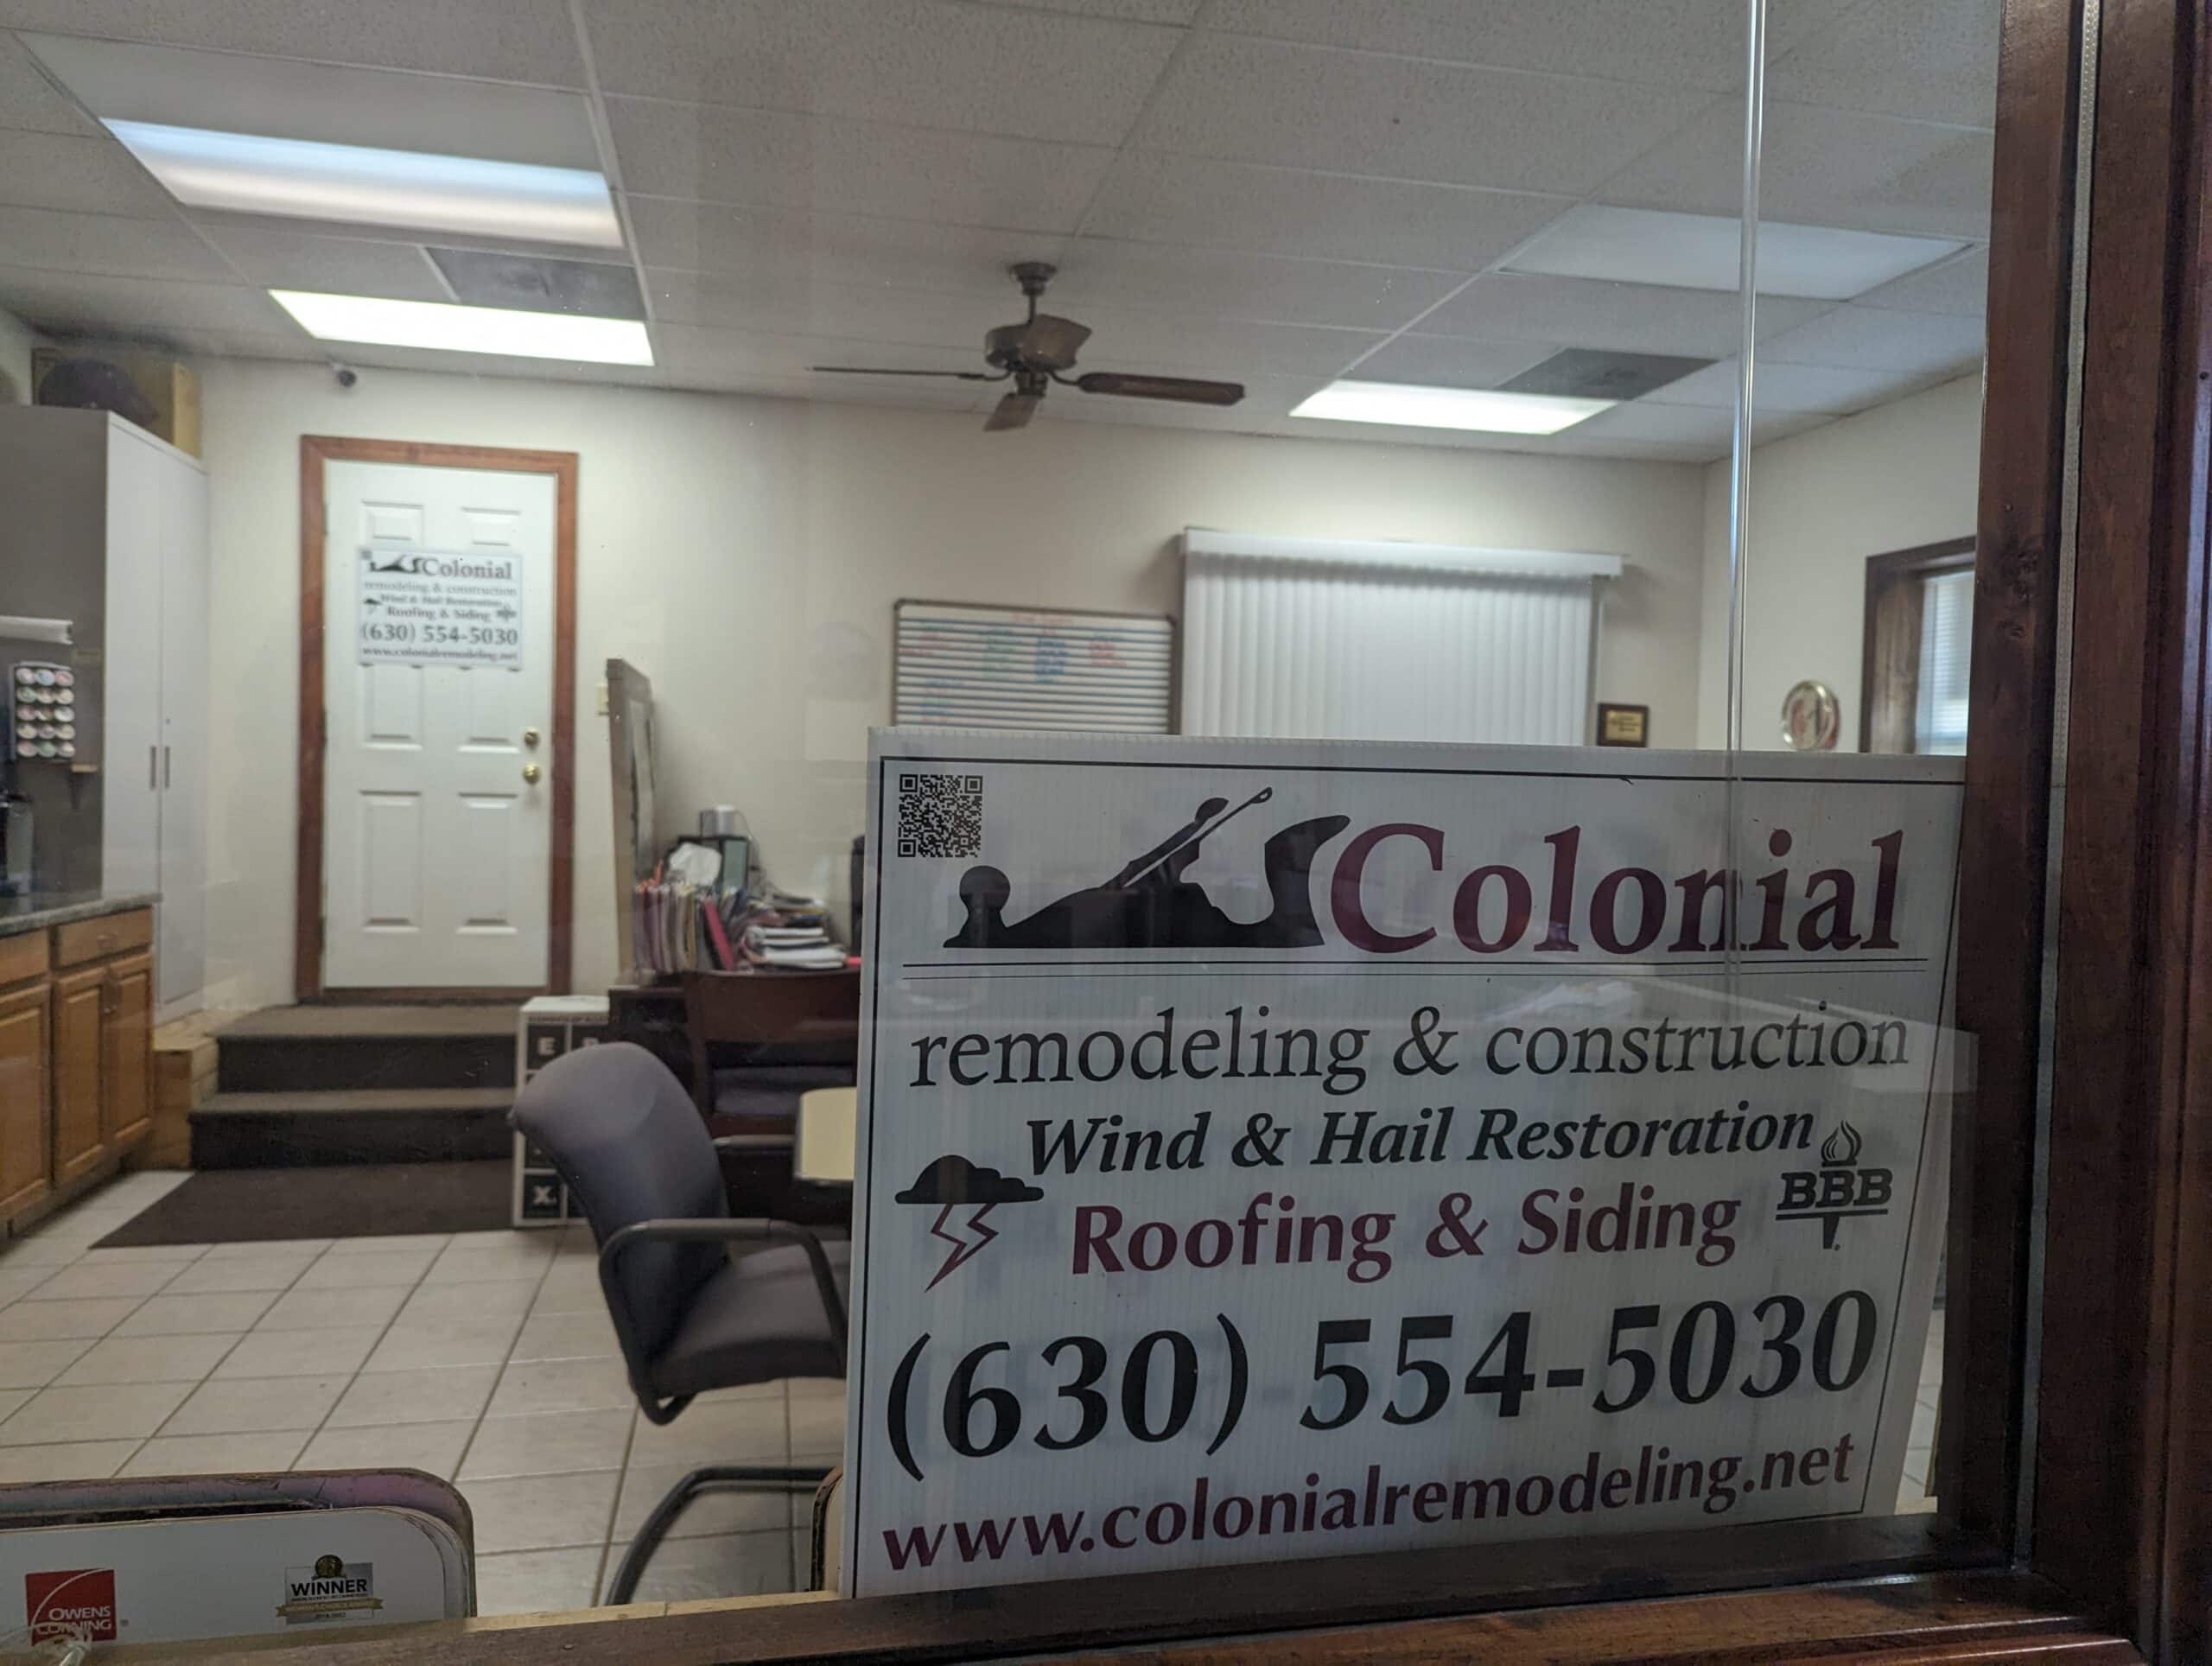 A photo of the inside of the Colonial Remodeling Montgomery IL office